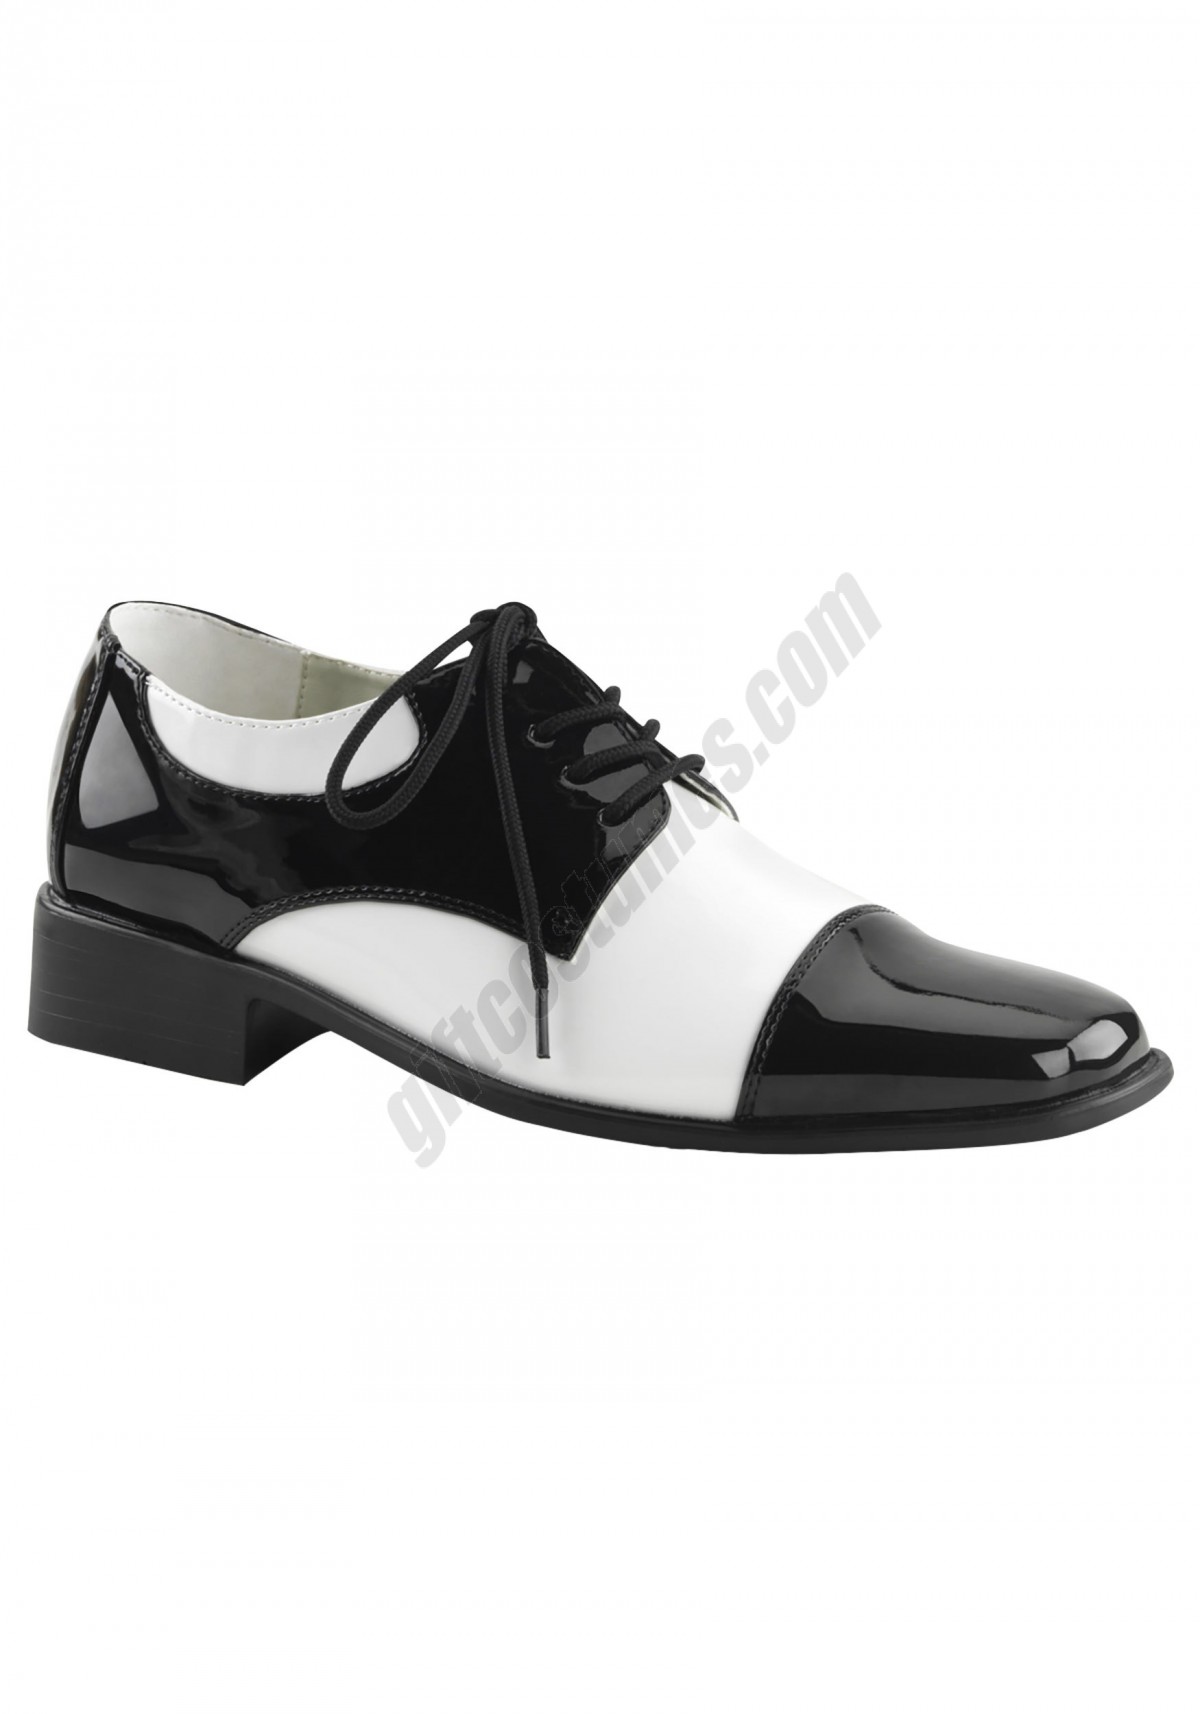 Men's Deluxe Gangster Shoes Promotions - -0